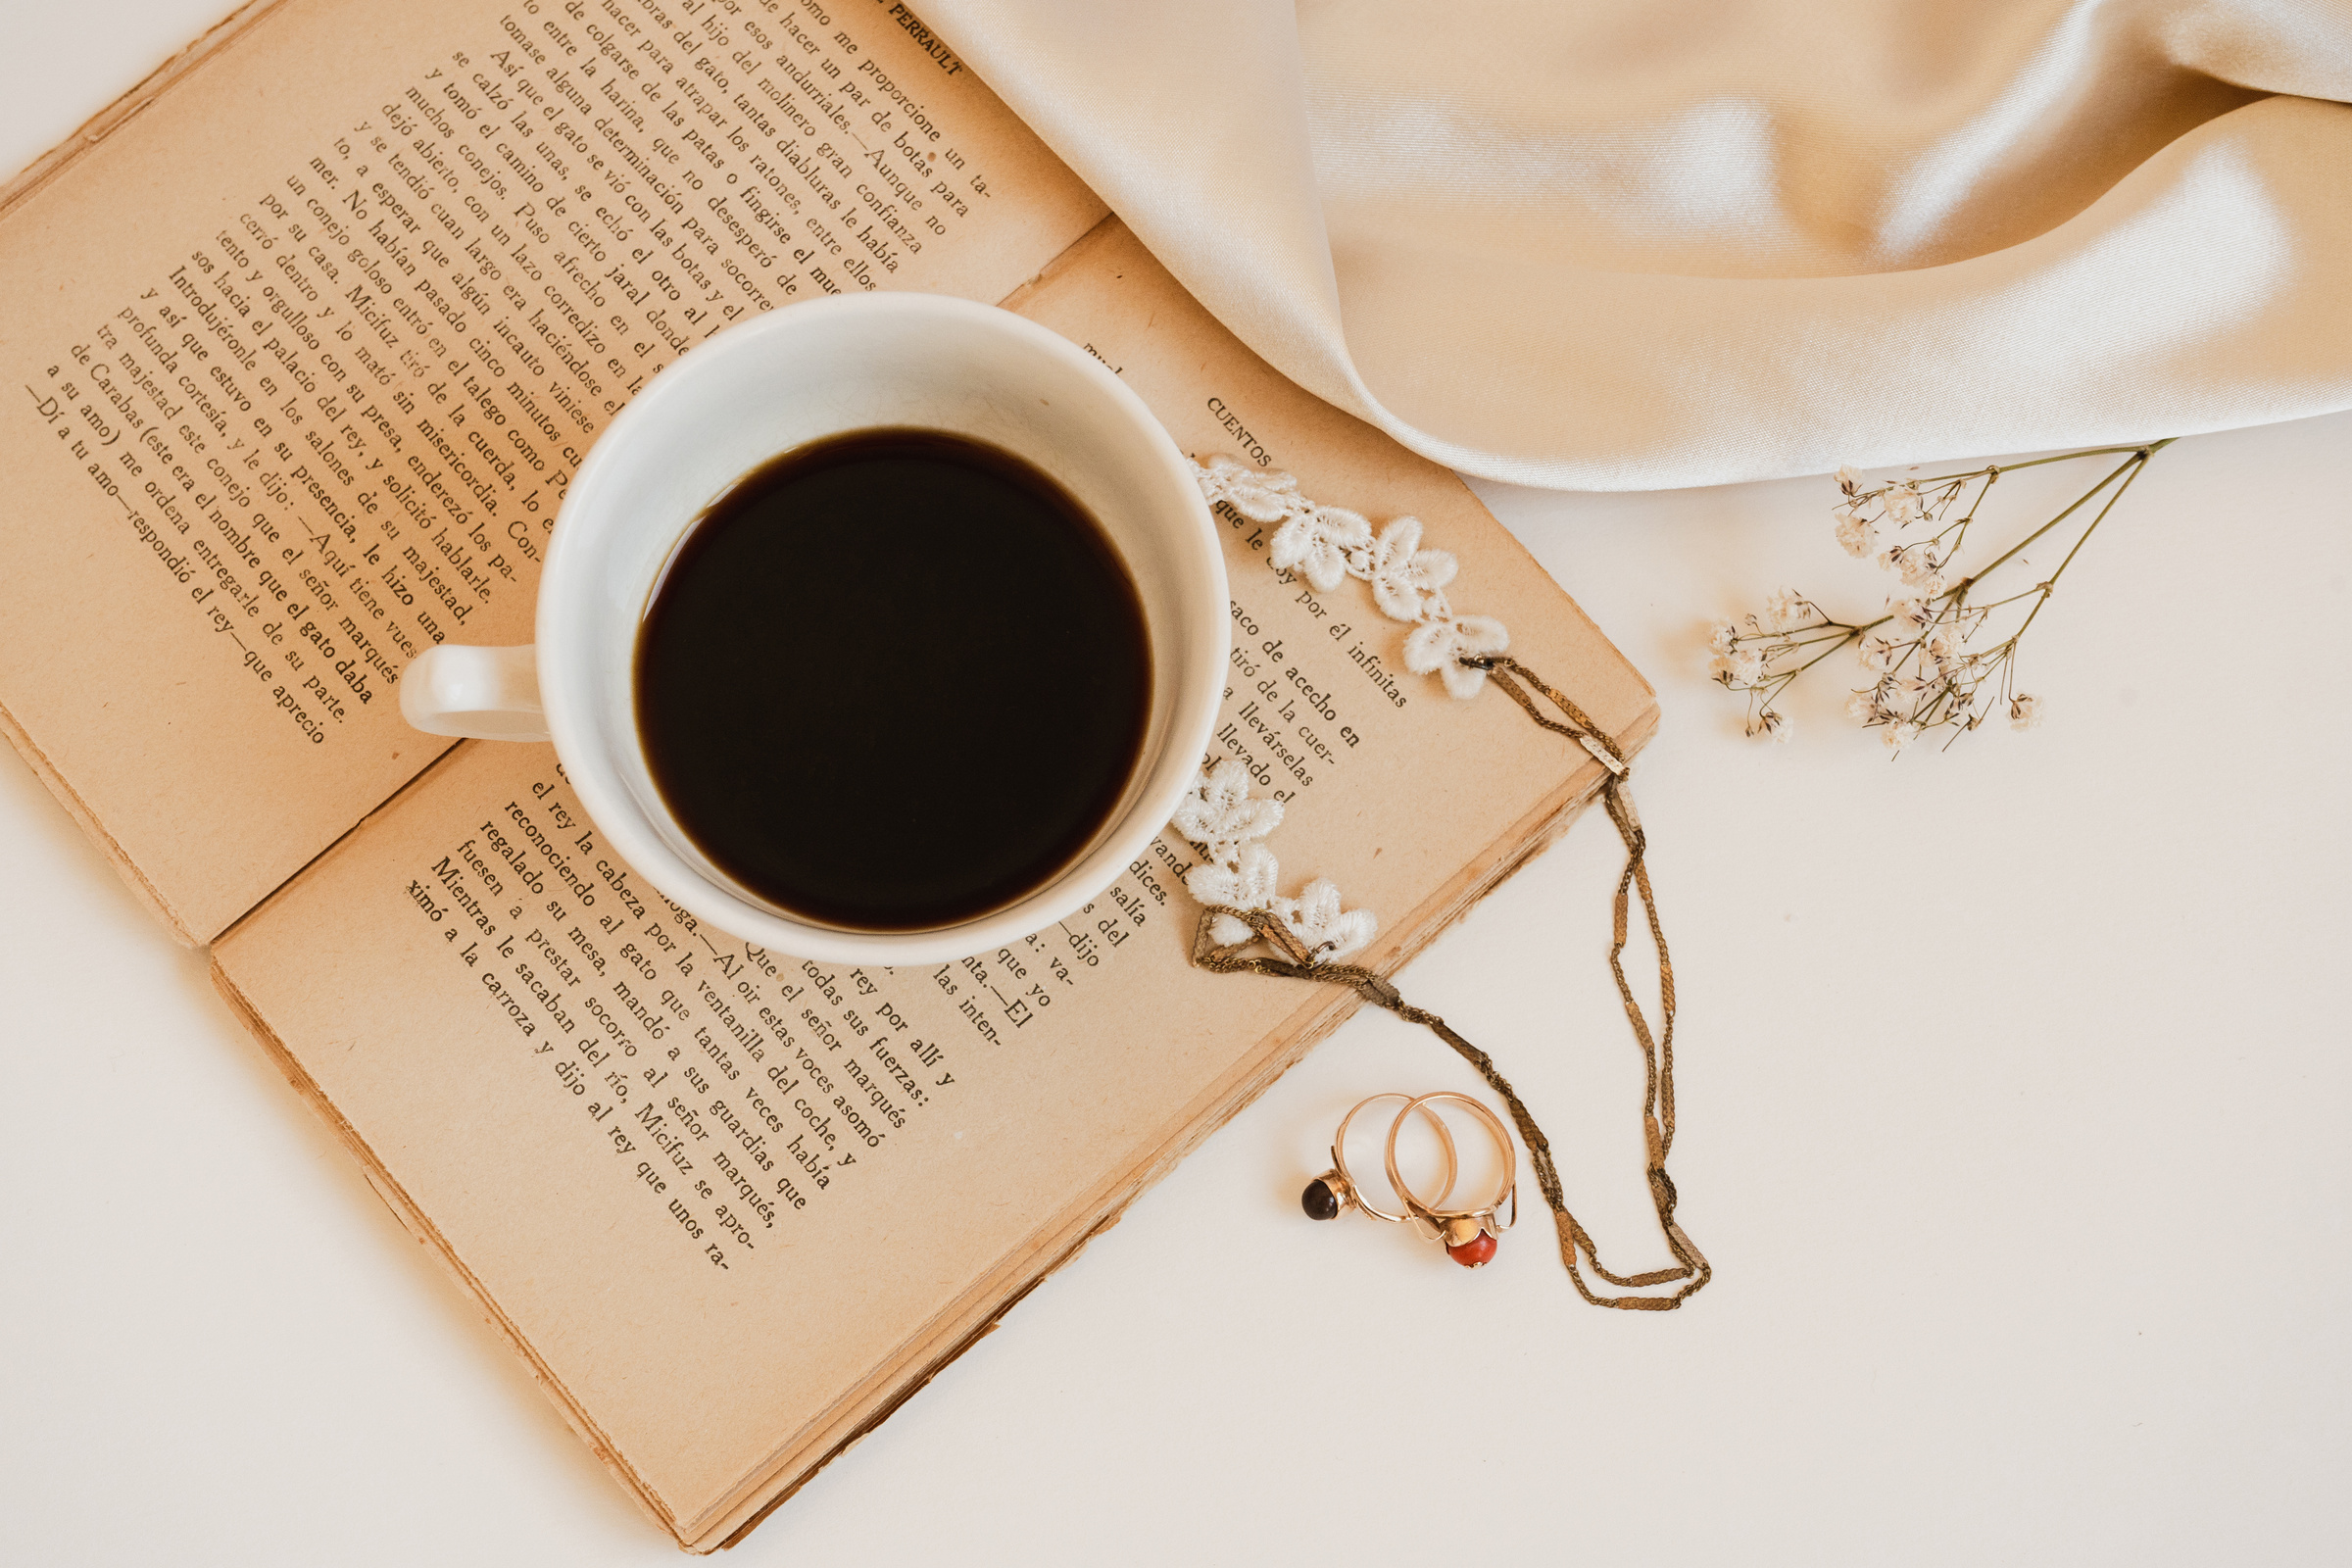 Pearl Necklace and Earrings with Cup of Coffee on Book